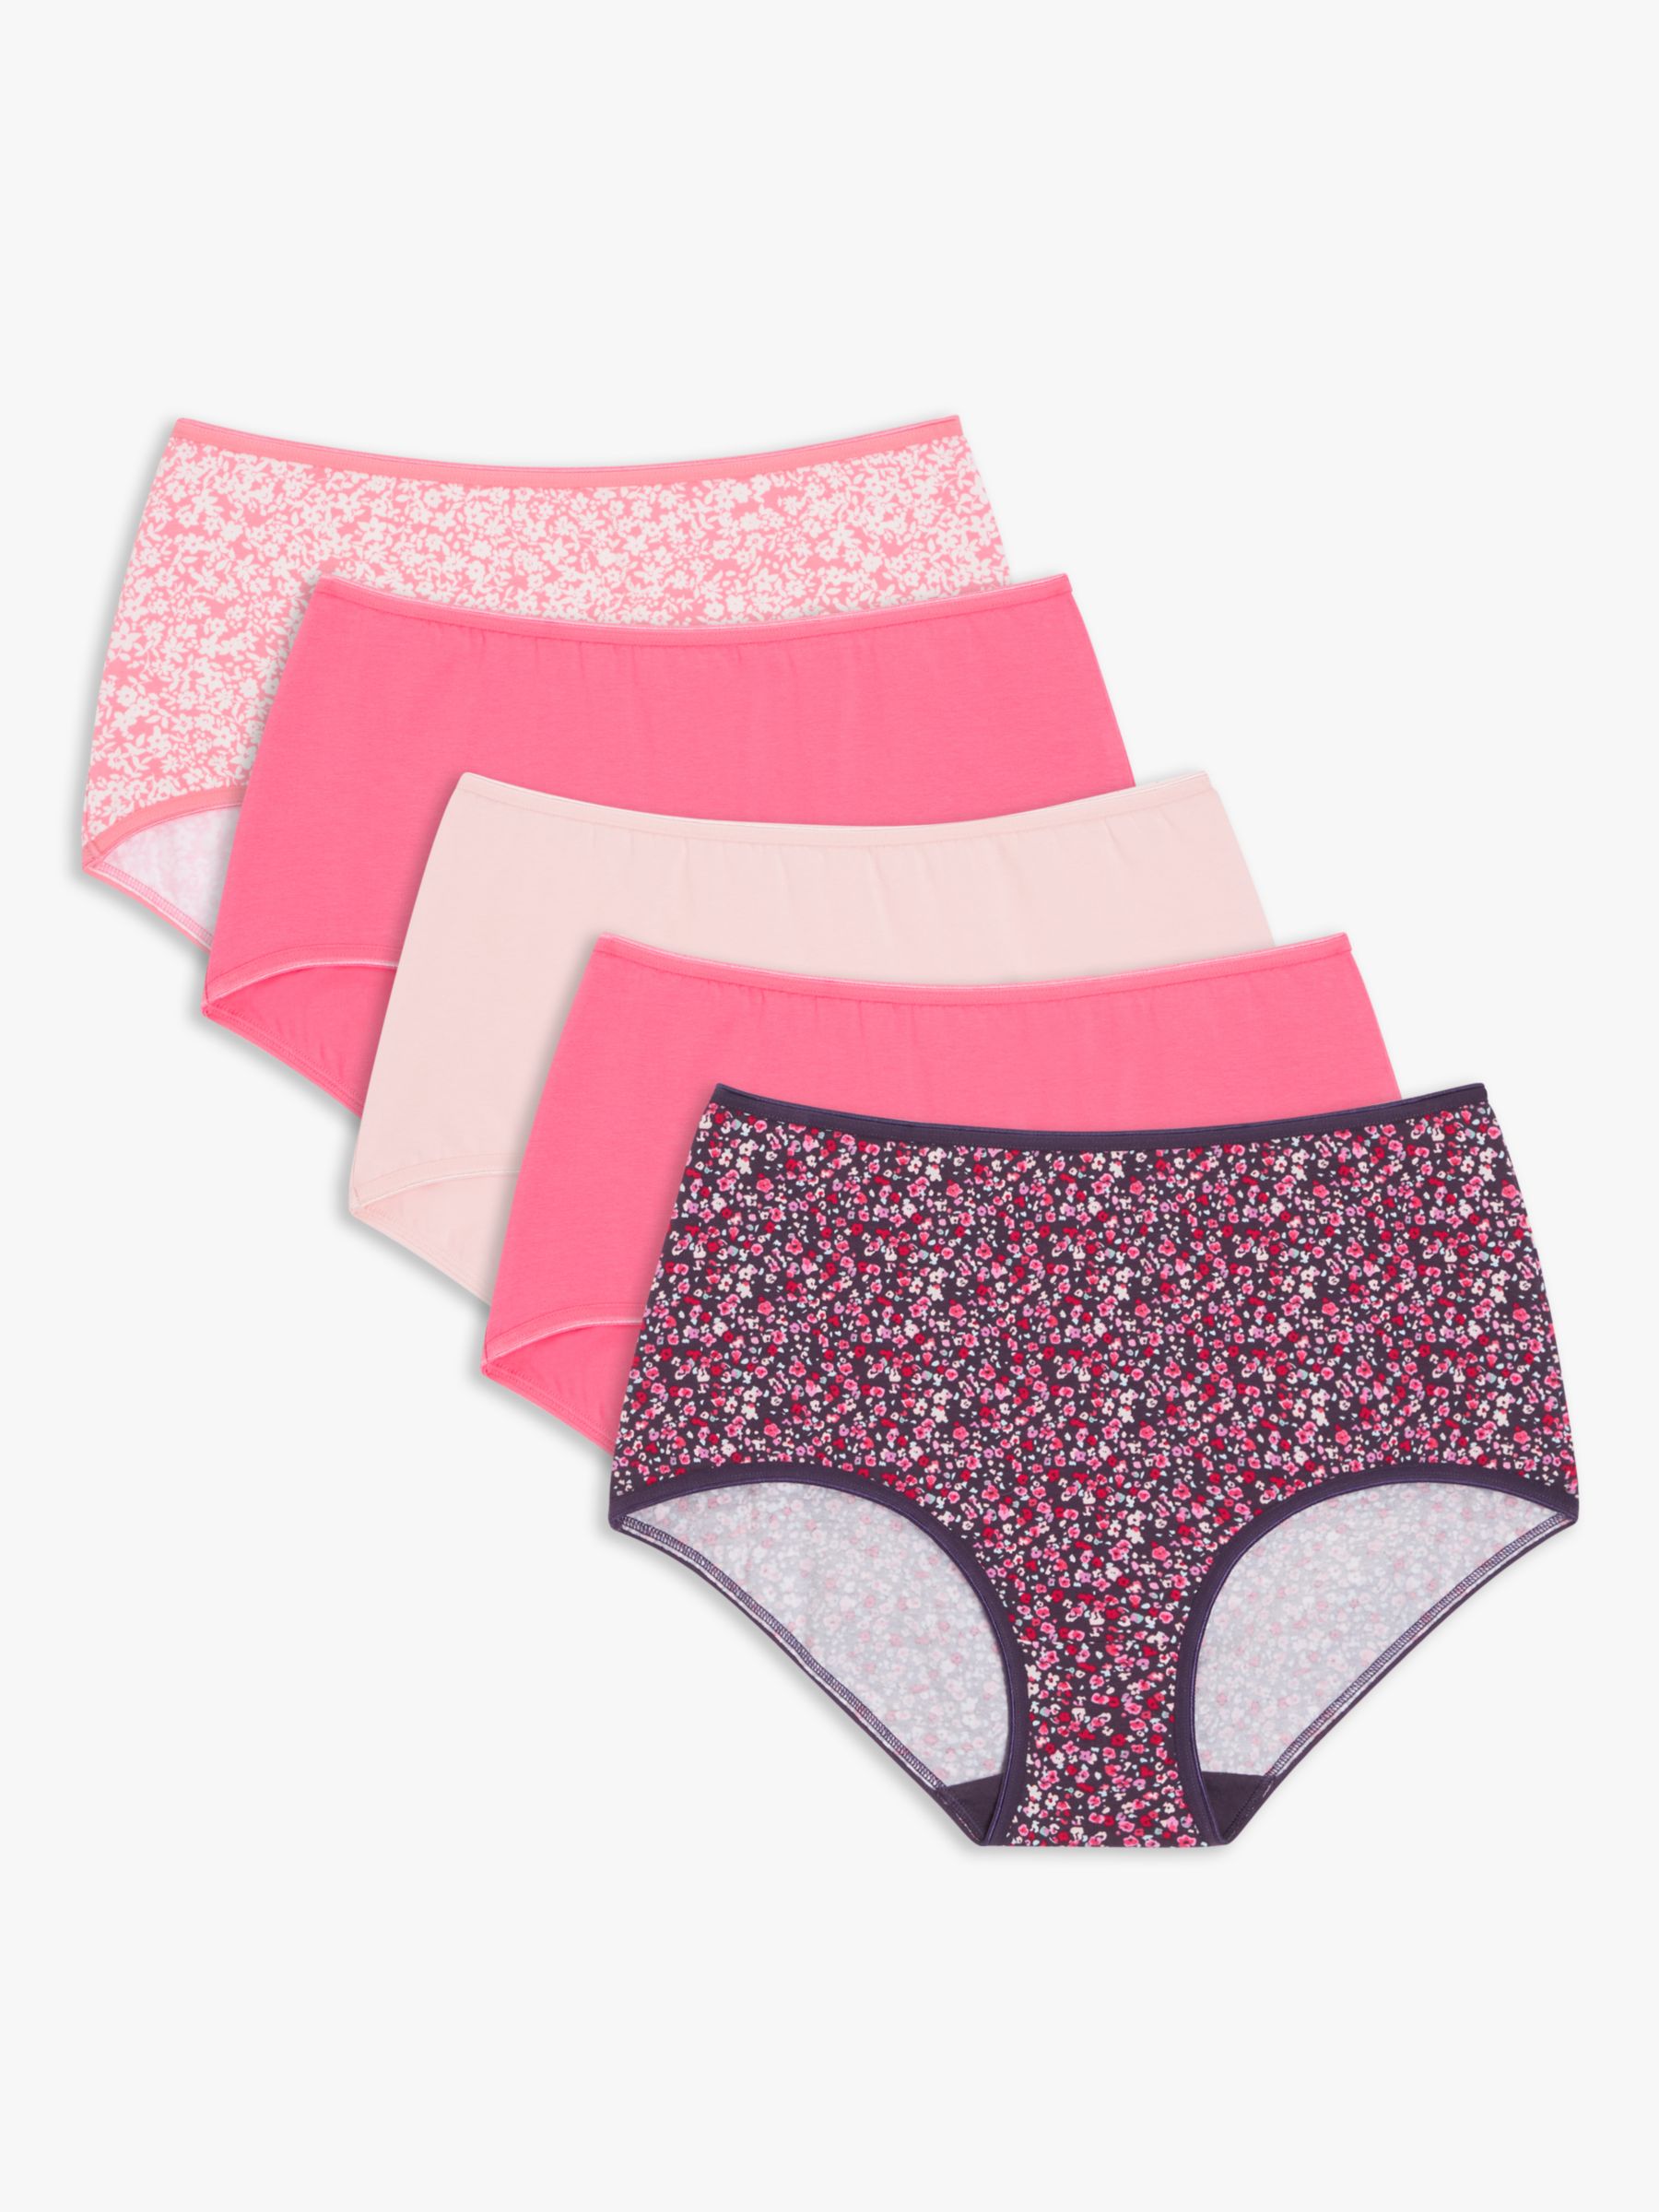 Buy Pastel Spot Print Lace Full Knickers 5 Pack 18, Knickers